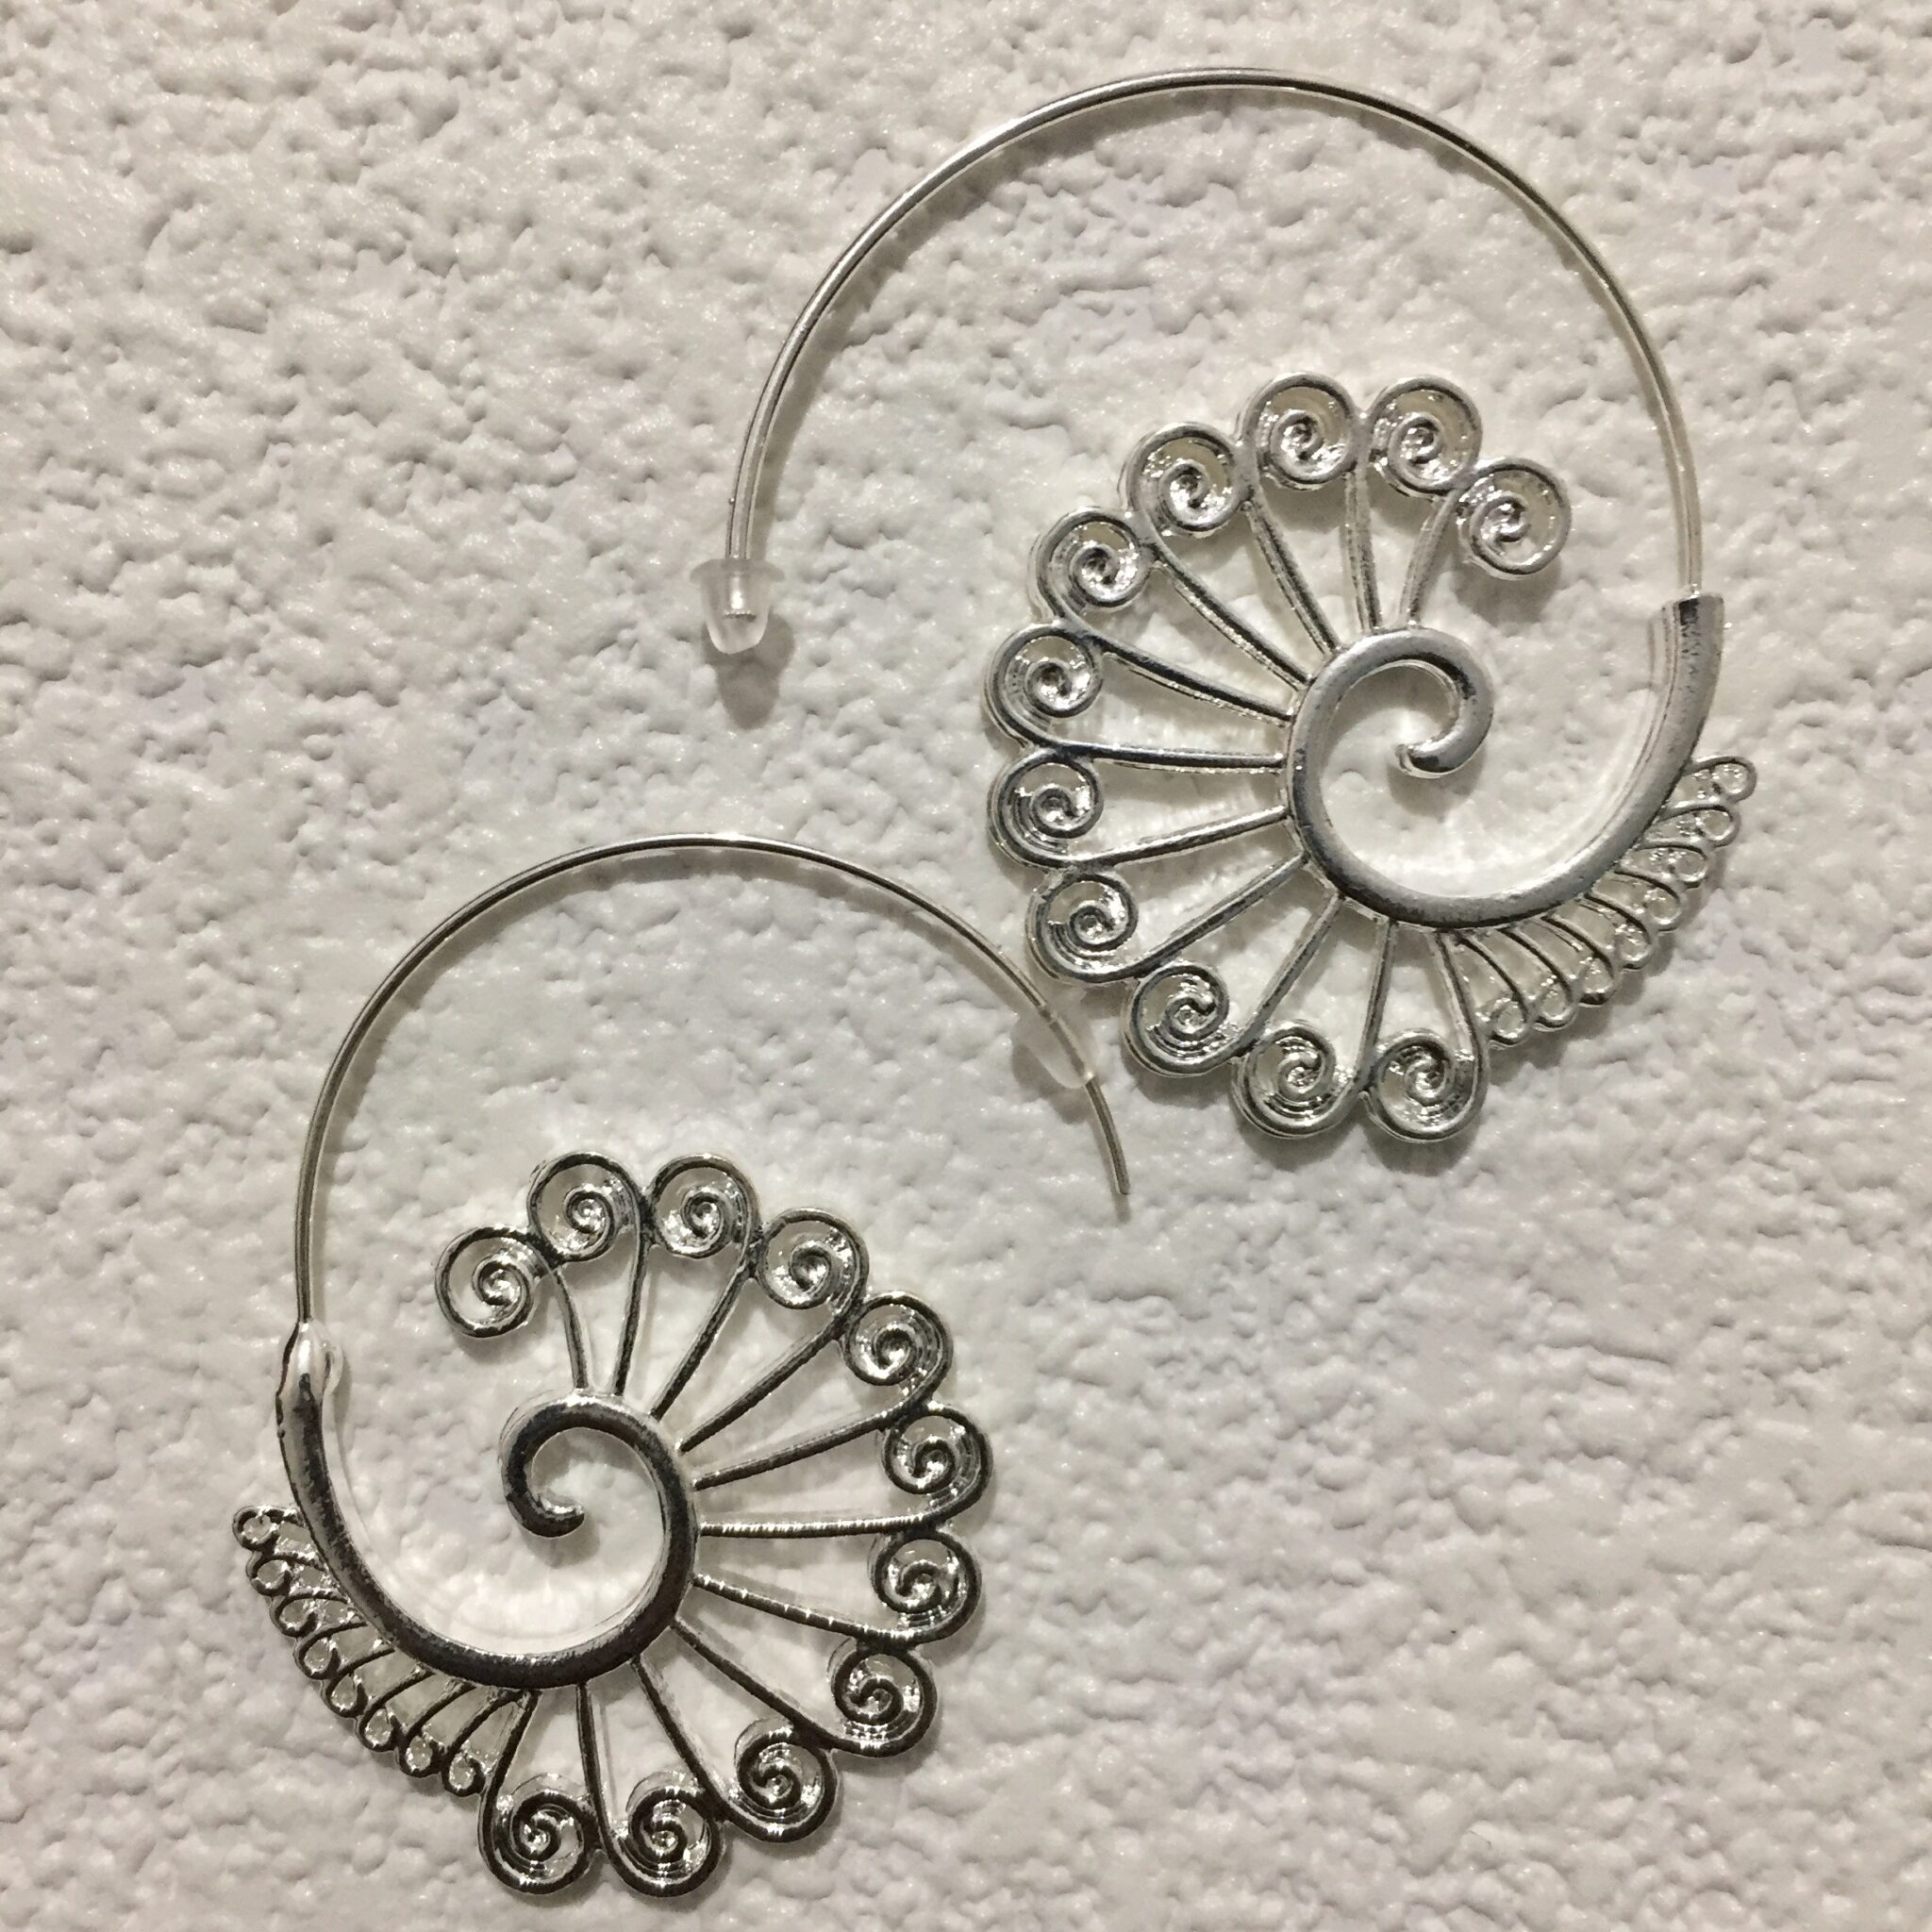 Gorgeous pair of Silver Plated Tribal Ethnic Twist Spiral Hippy Boho Festival Earrings - Style 4